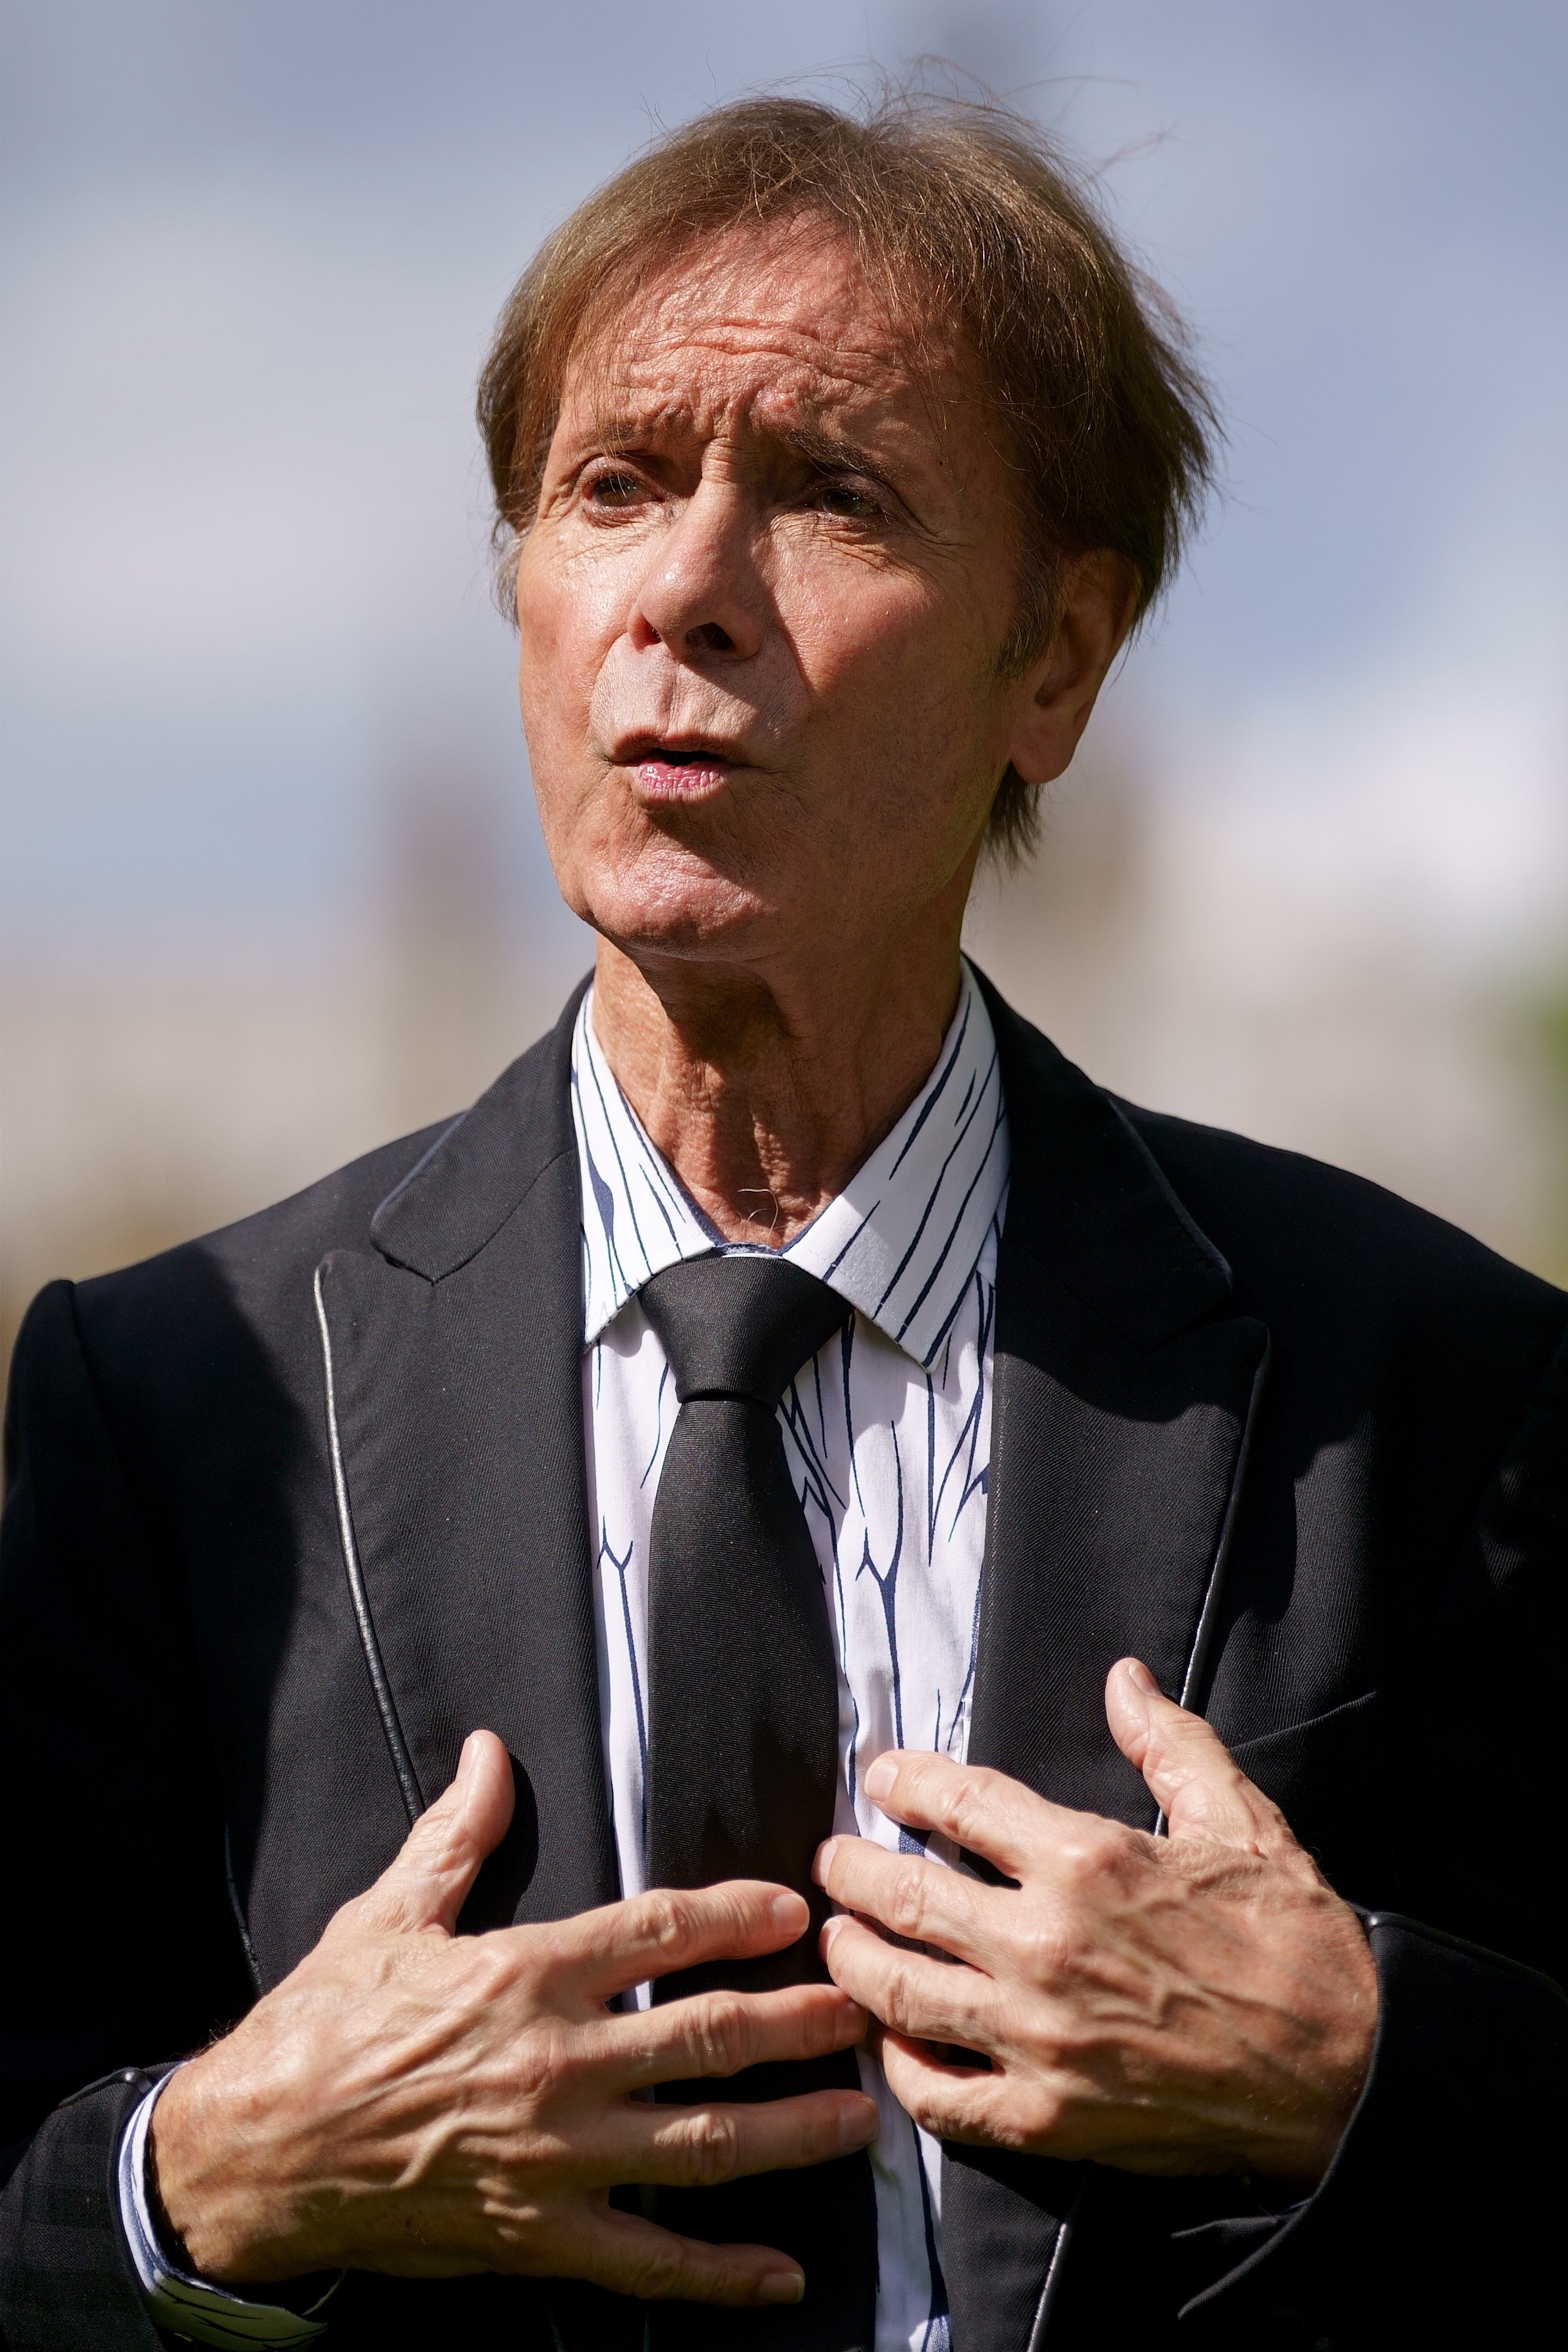 False accusations against Sir Cliff Richard in 2014 had an impact on reporting